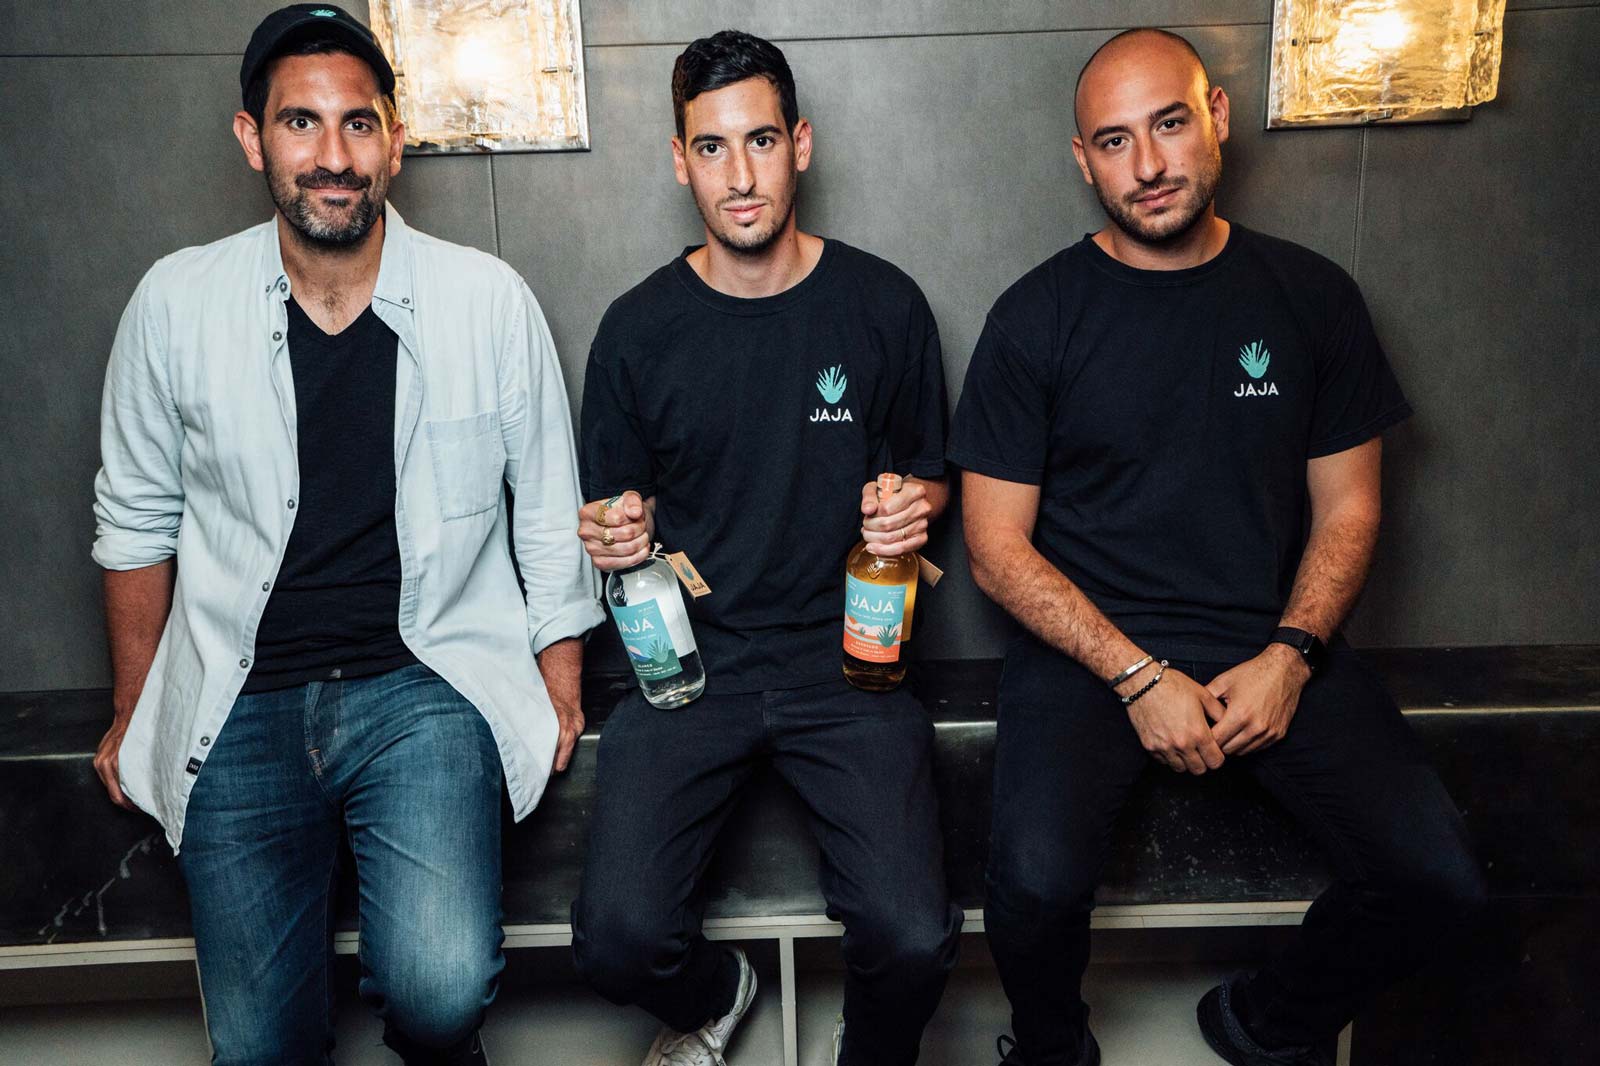 Elliot Tebele with co-founders of JAJA Tequila.